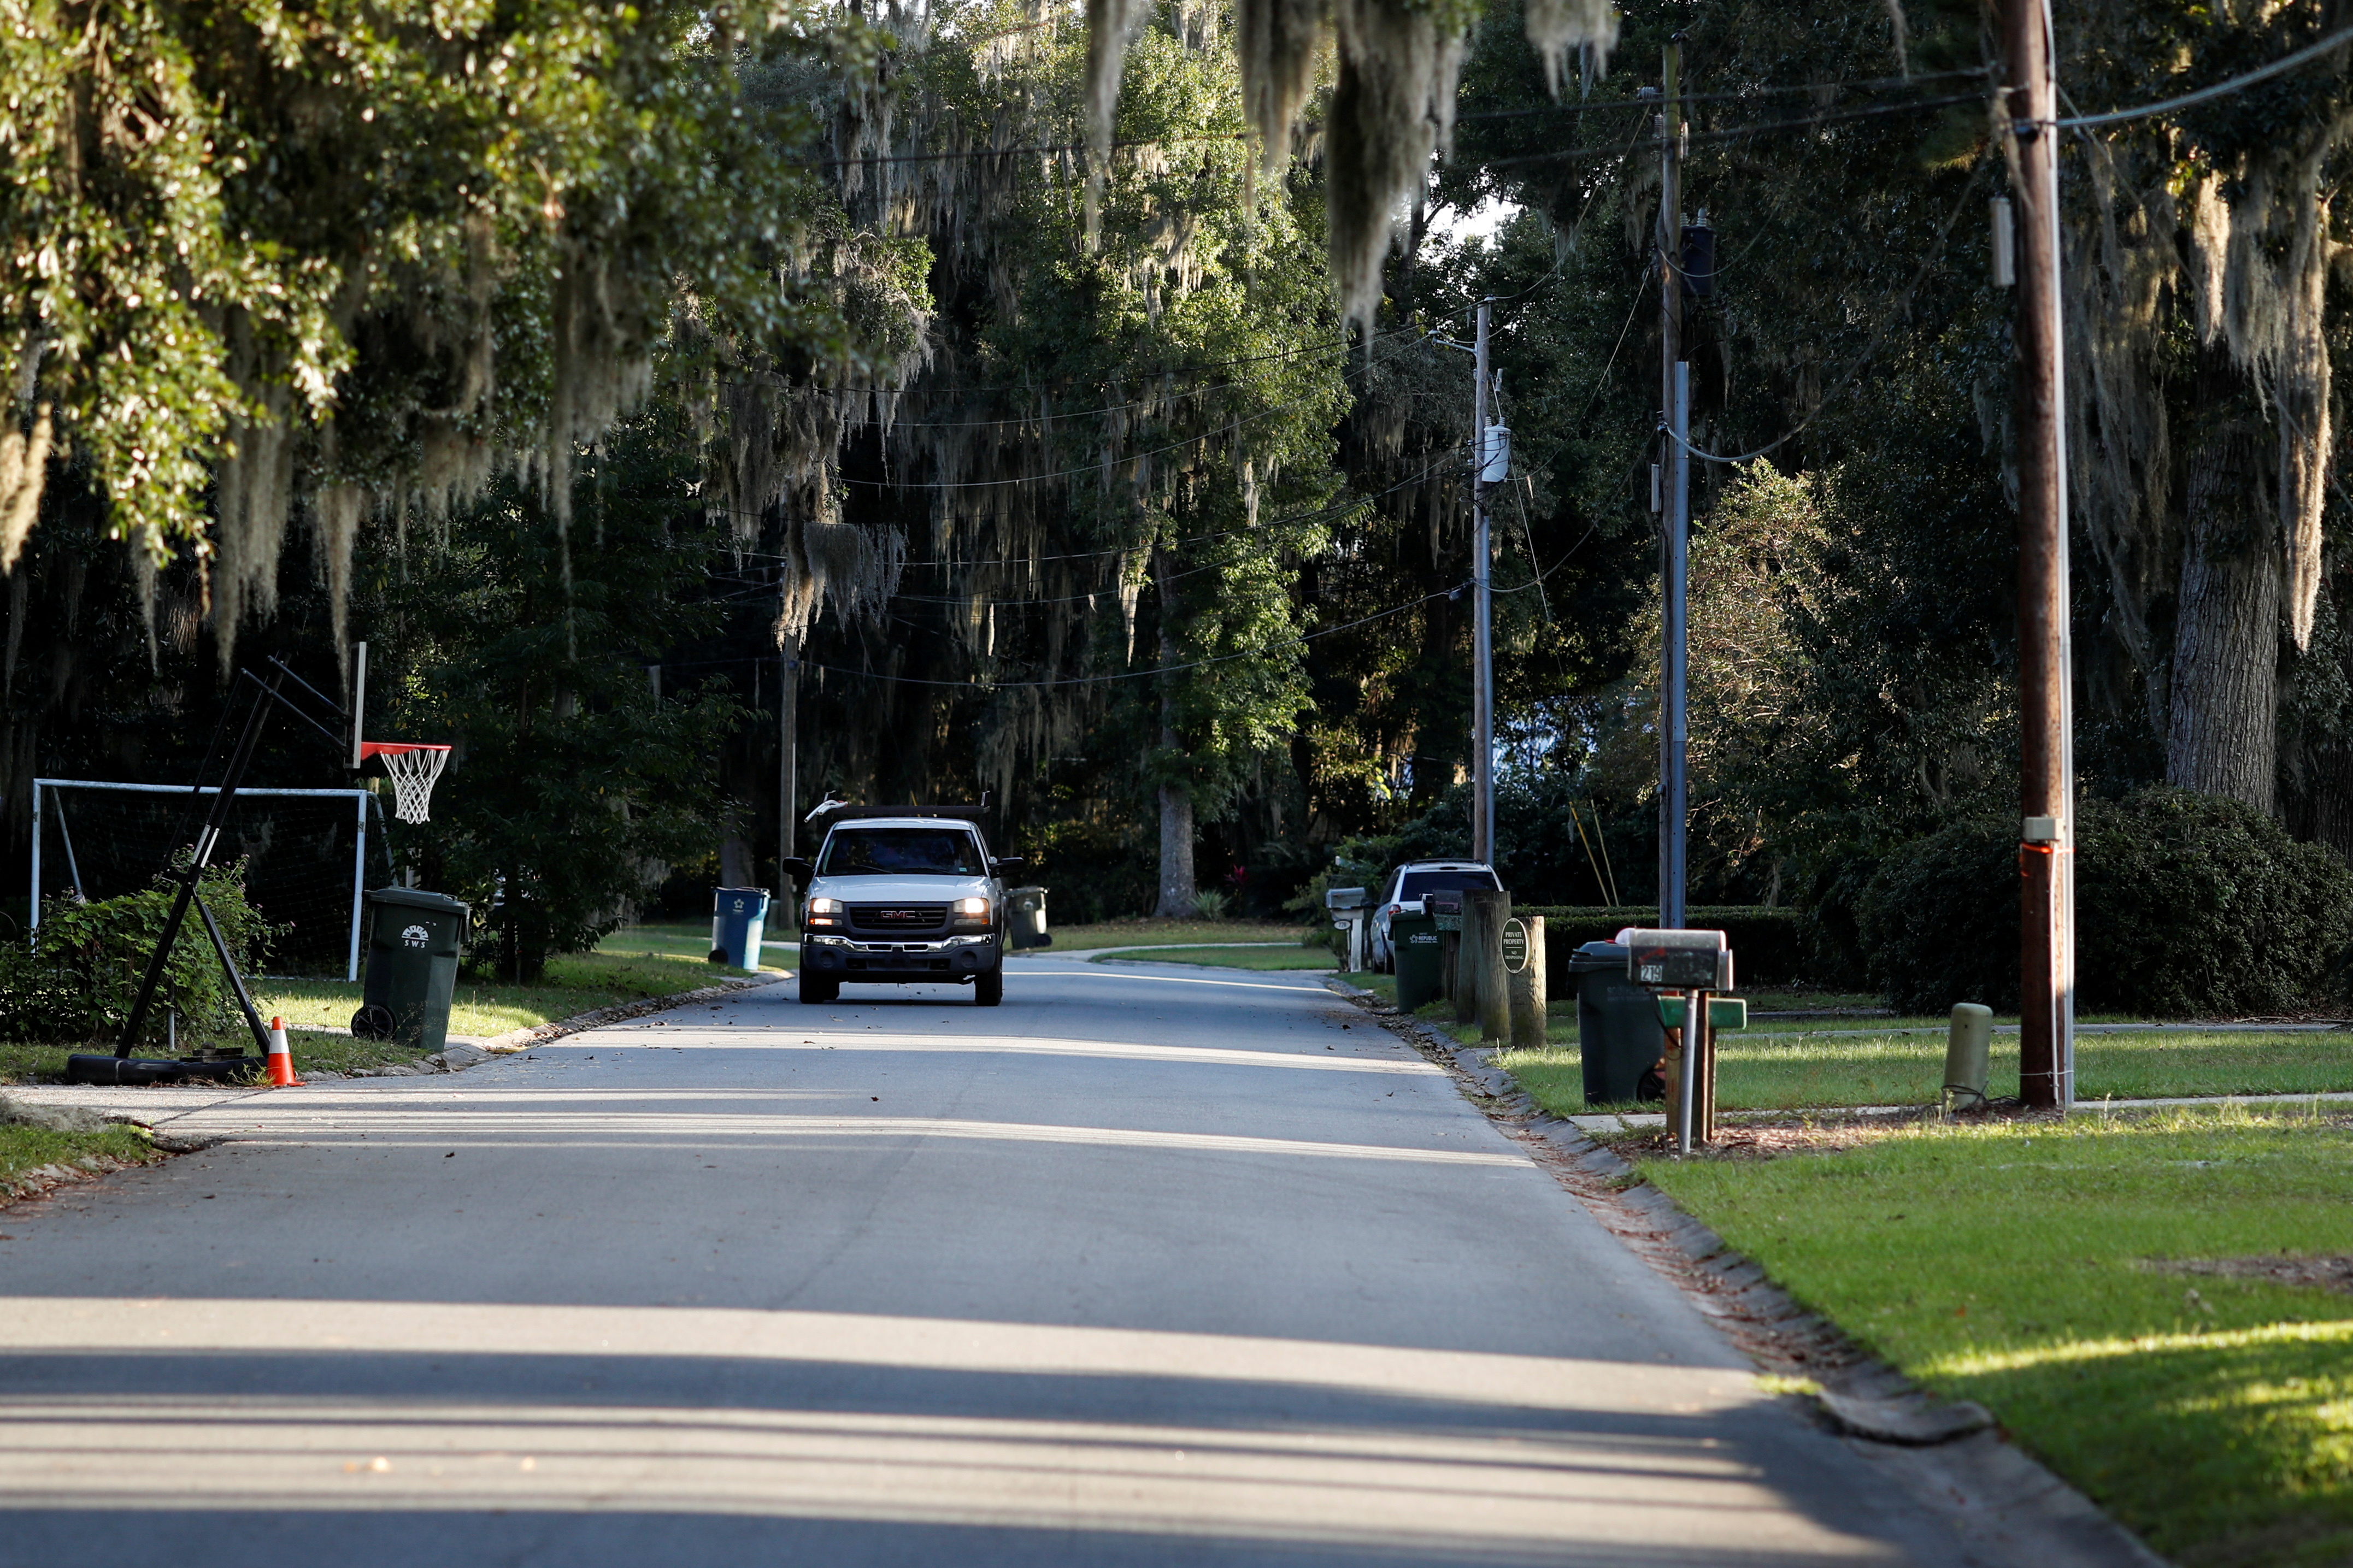 General view of the Satilla Shores subdivision where Ahmaud Arbery was shot to death while going for a run last year February 2020 in Brunswick, Georgia, U.S. October 21, 2021. REUTERS/Octavio Jones/File Photo